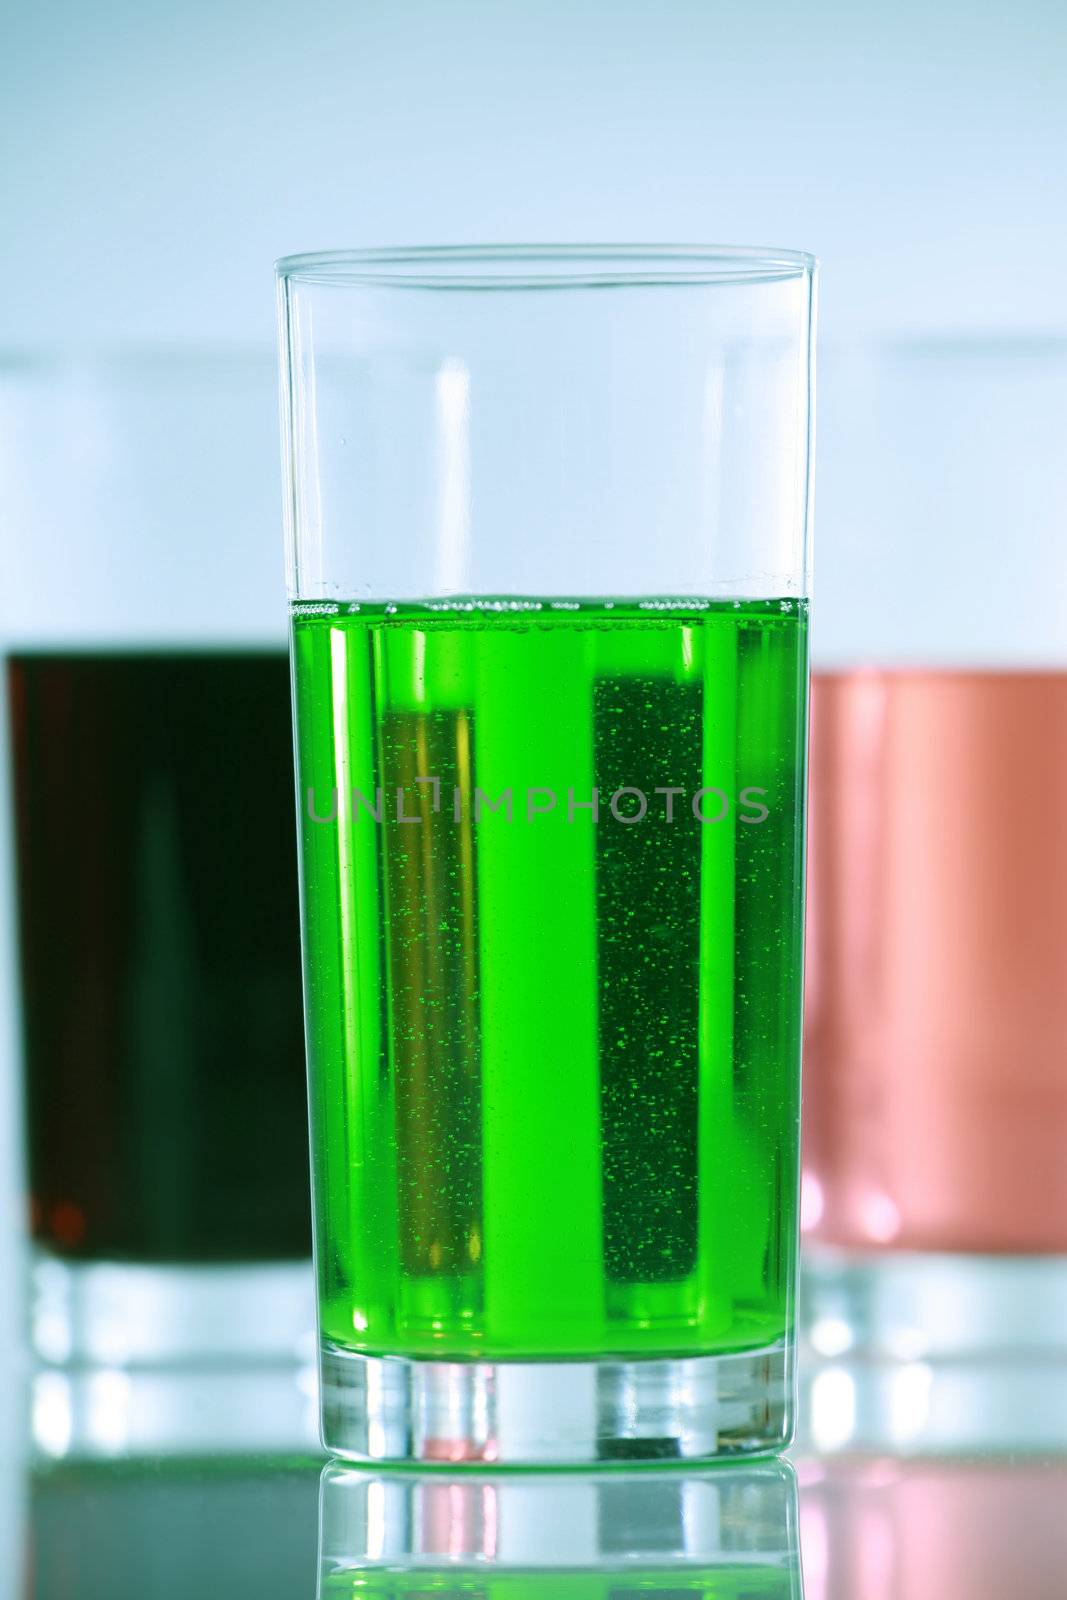 Three glasses with colorful drinks, side by side. blue tones in background